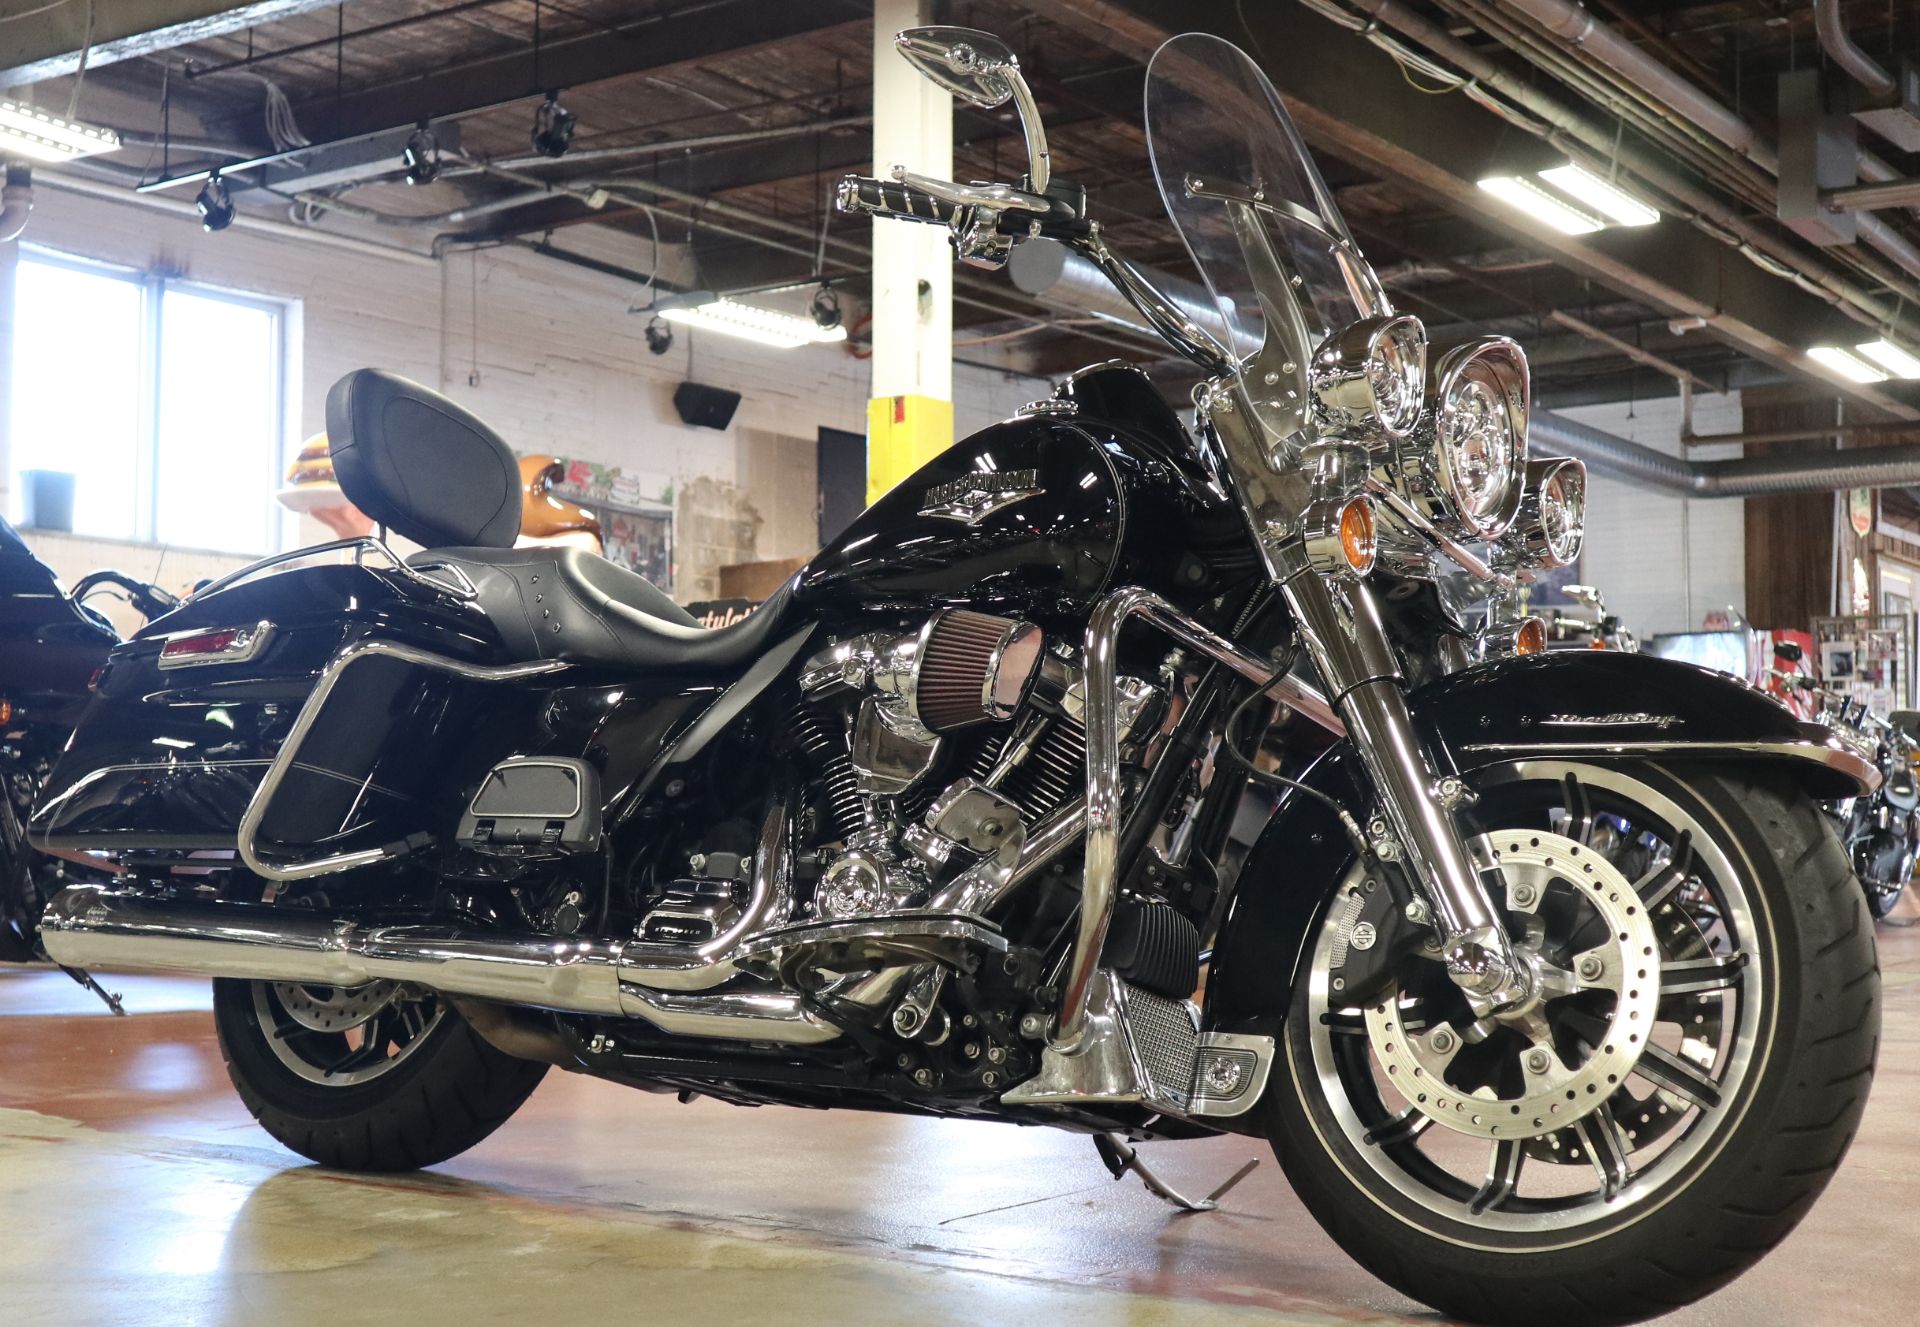 2017 Harley-Davidson Road King® in New London, Connecticut - Photo 2